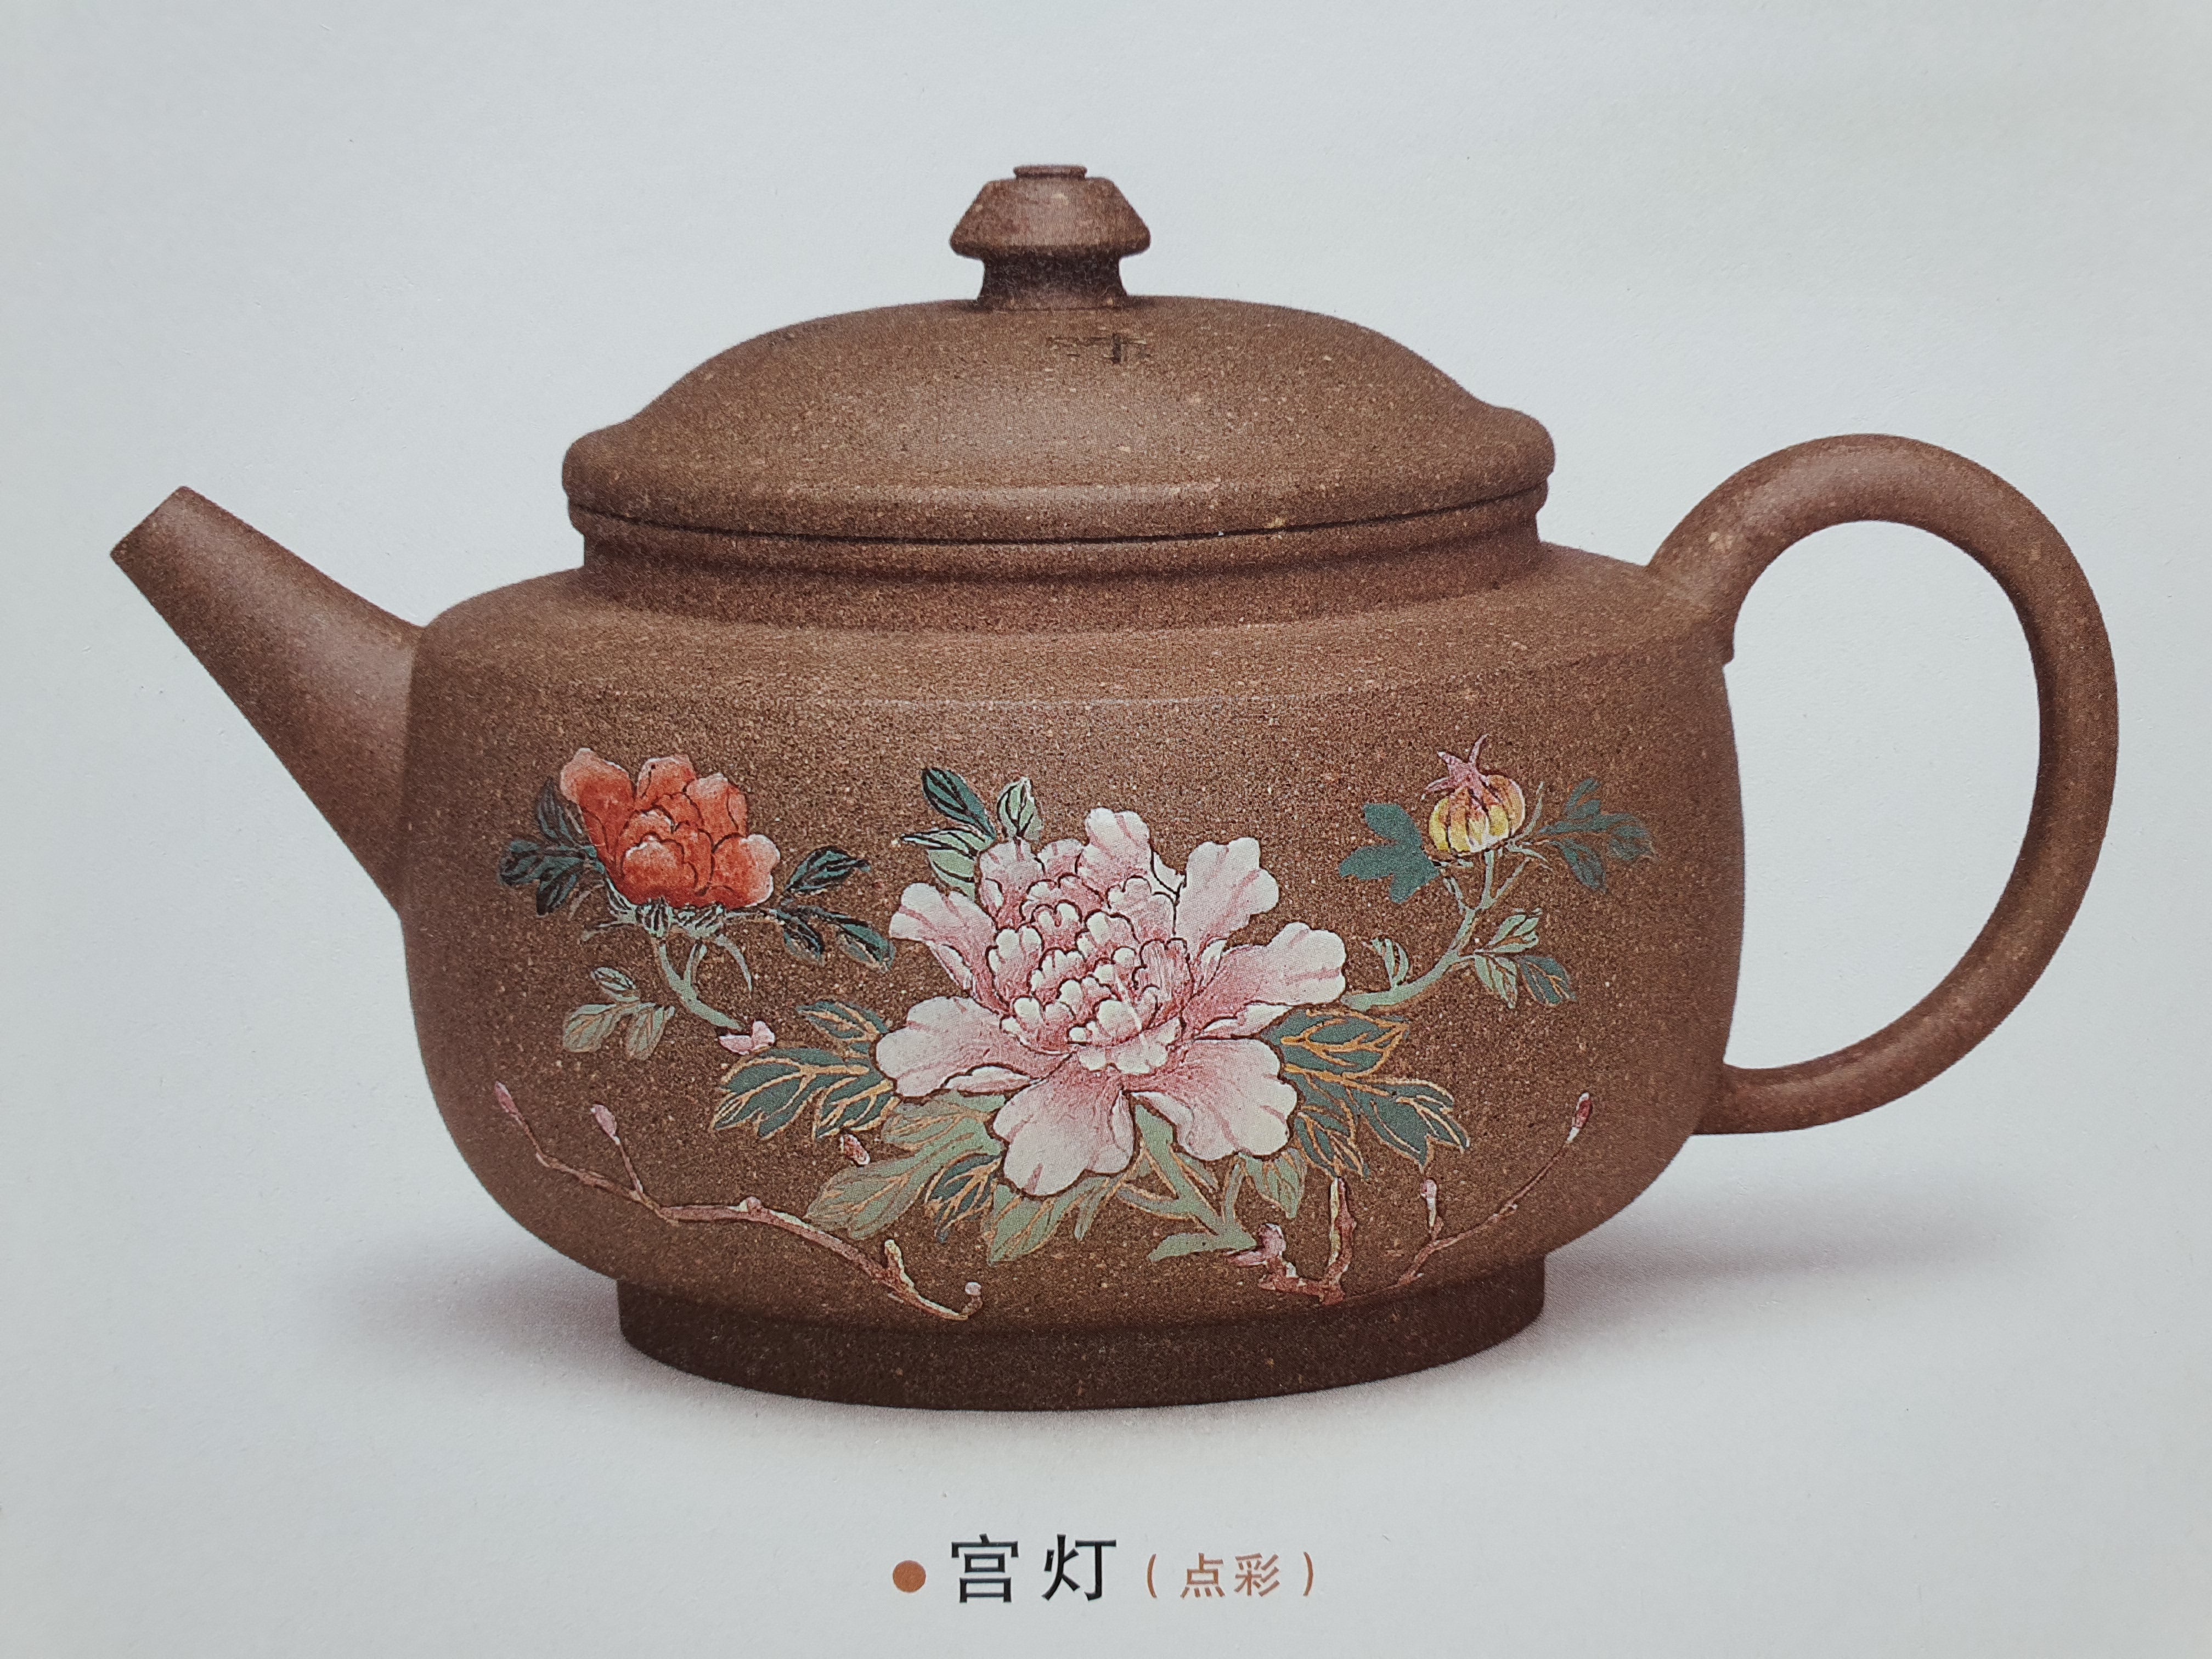 "Gong Deng" 宫灯 - L2 Senior Master Artist Cao Lan Fang 曹兰芳高级工艺美术师 - contact us for quote/commissioning Senior Master Cao